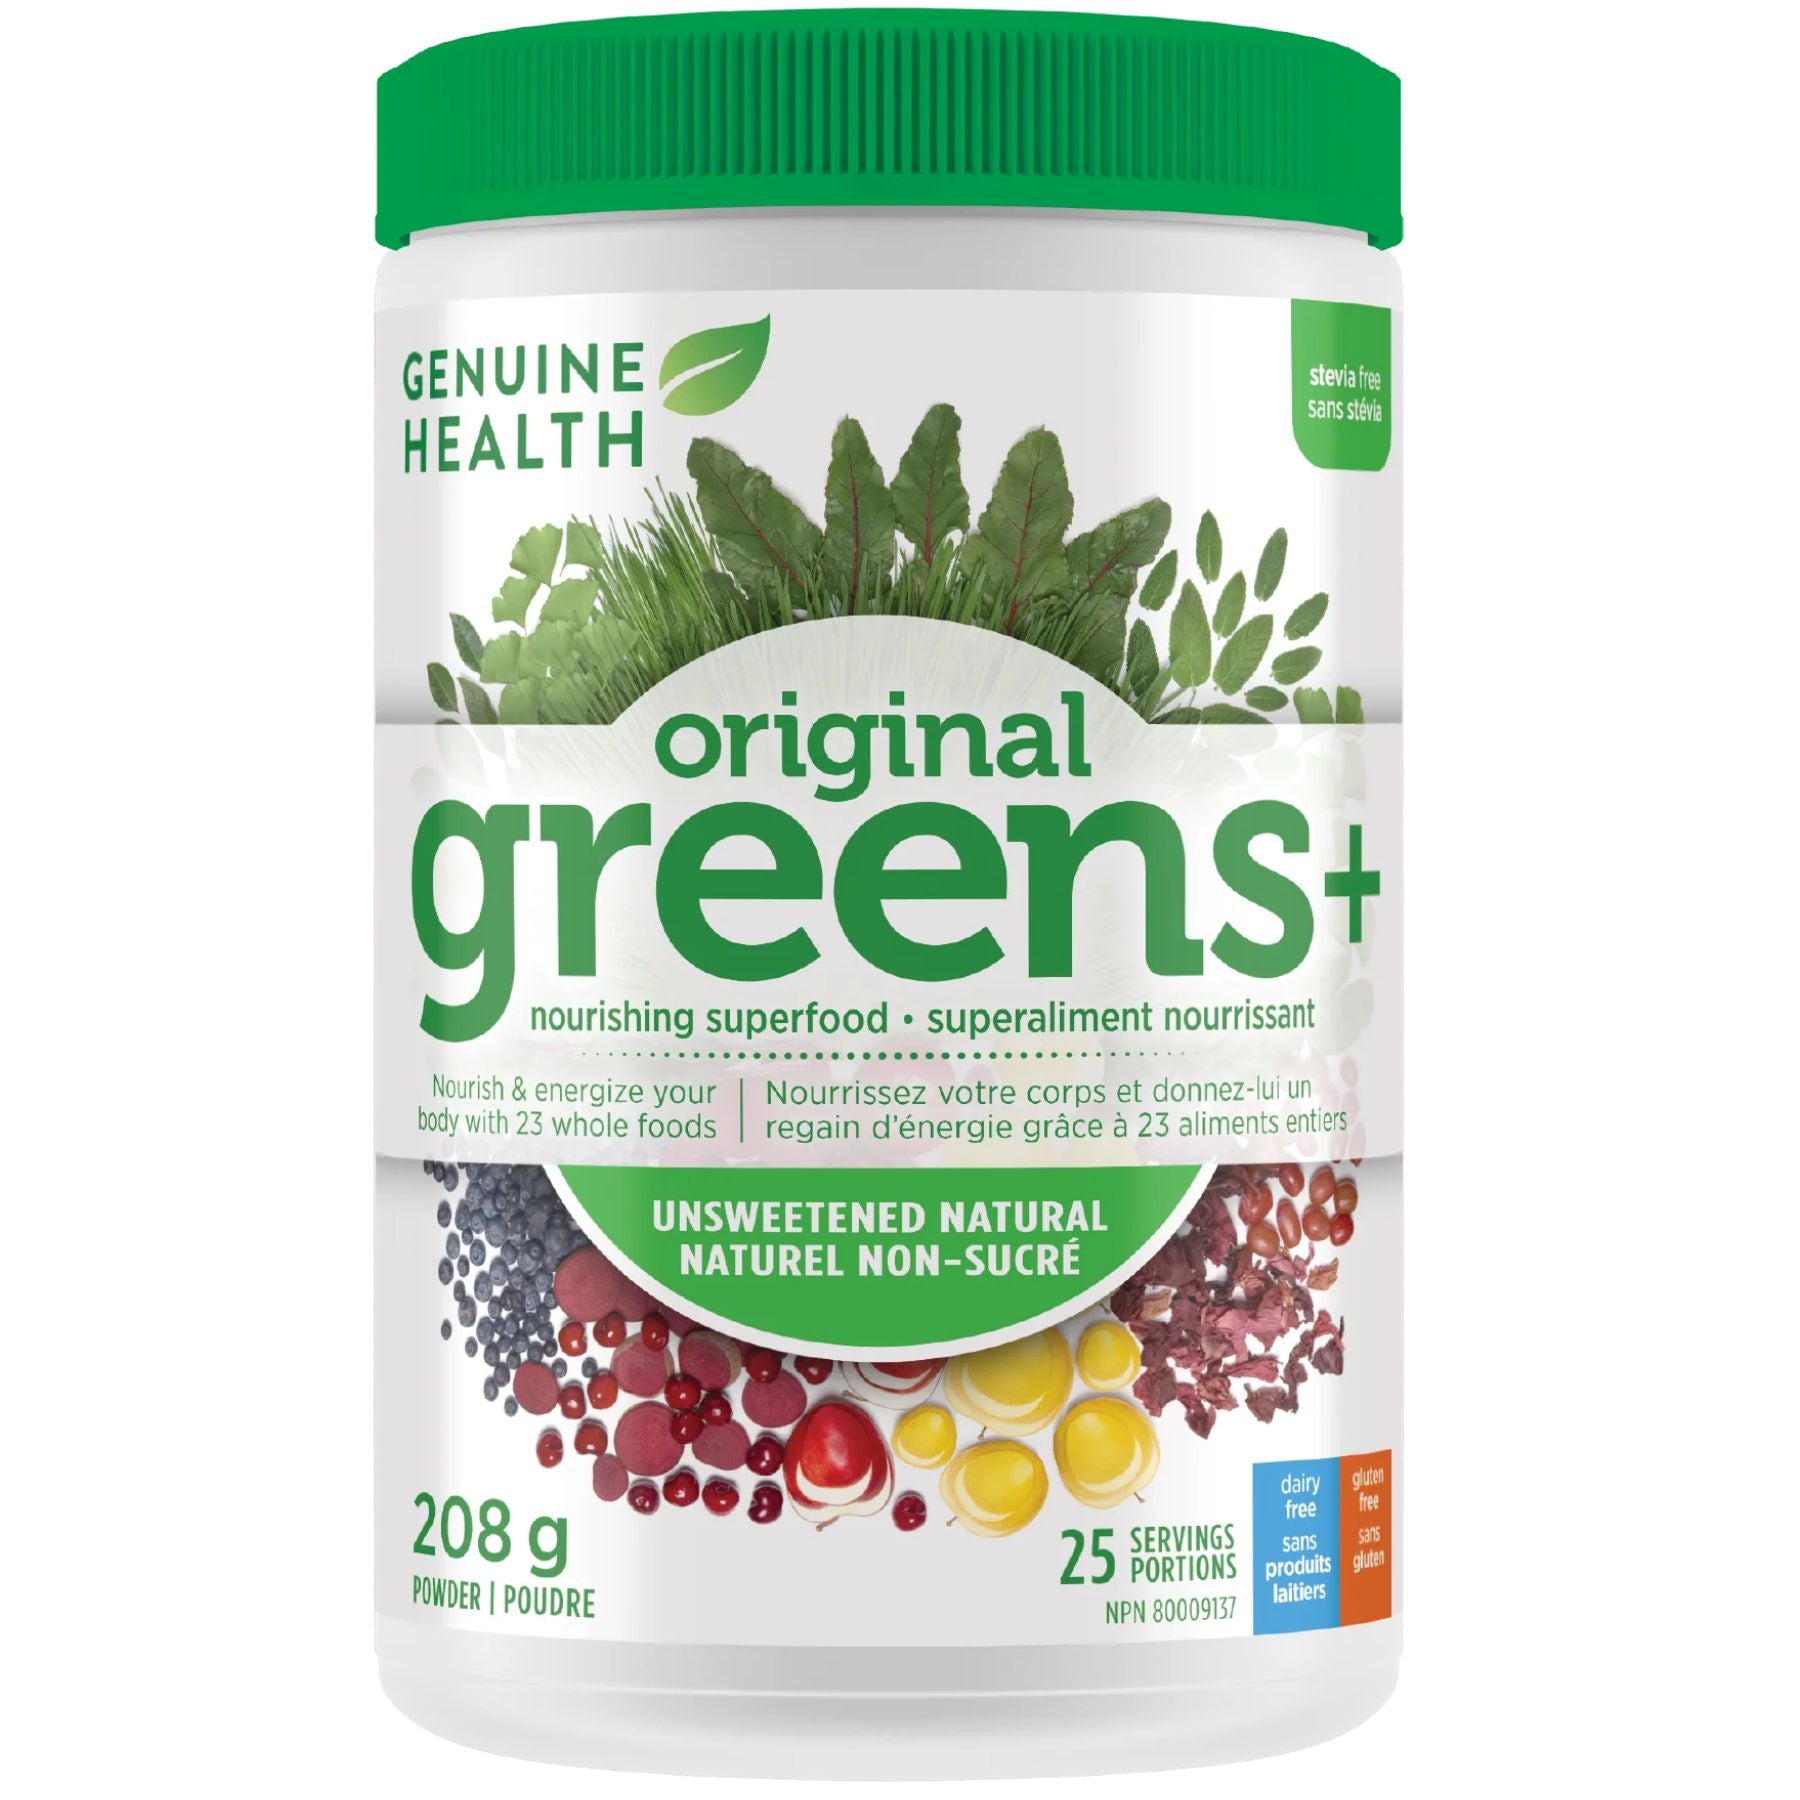 Genuine Health greens+ Unsweetened Natural 208g